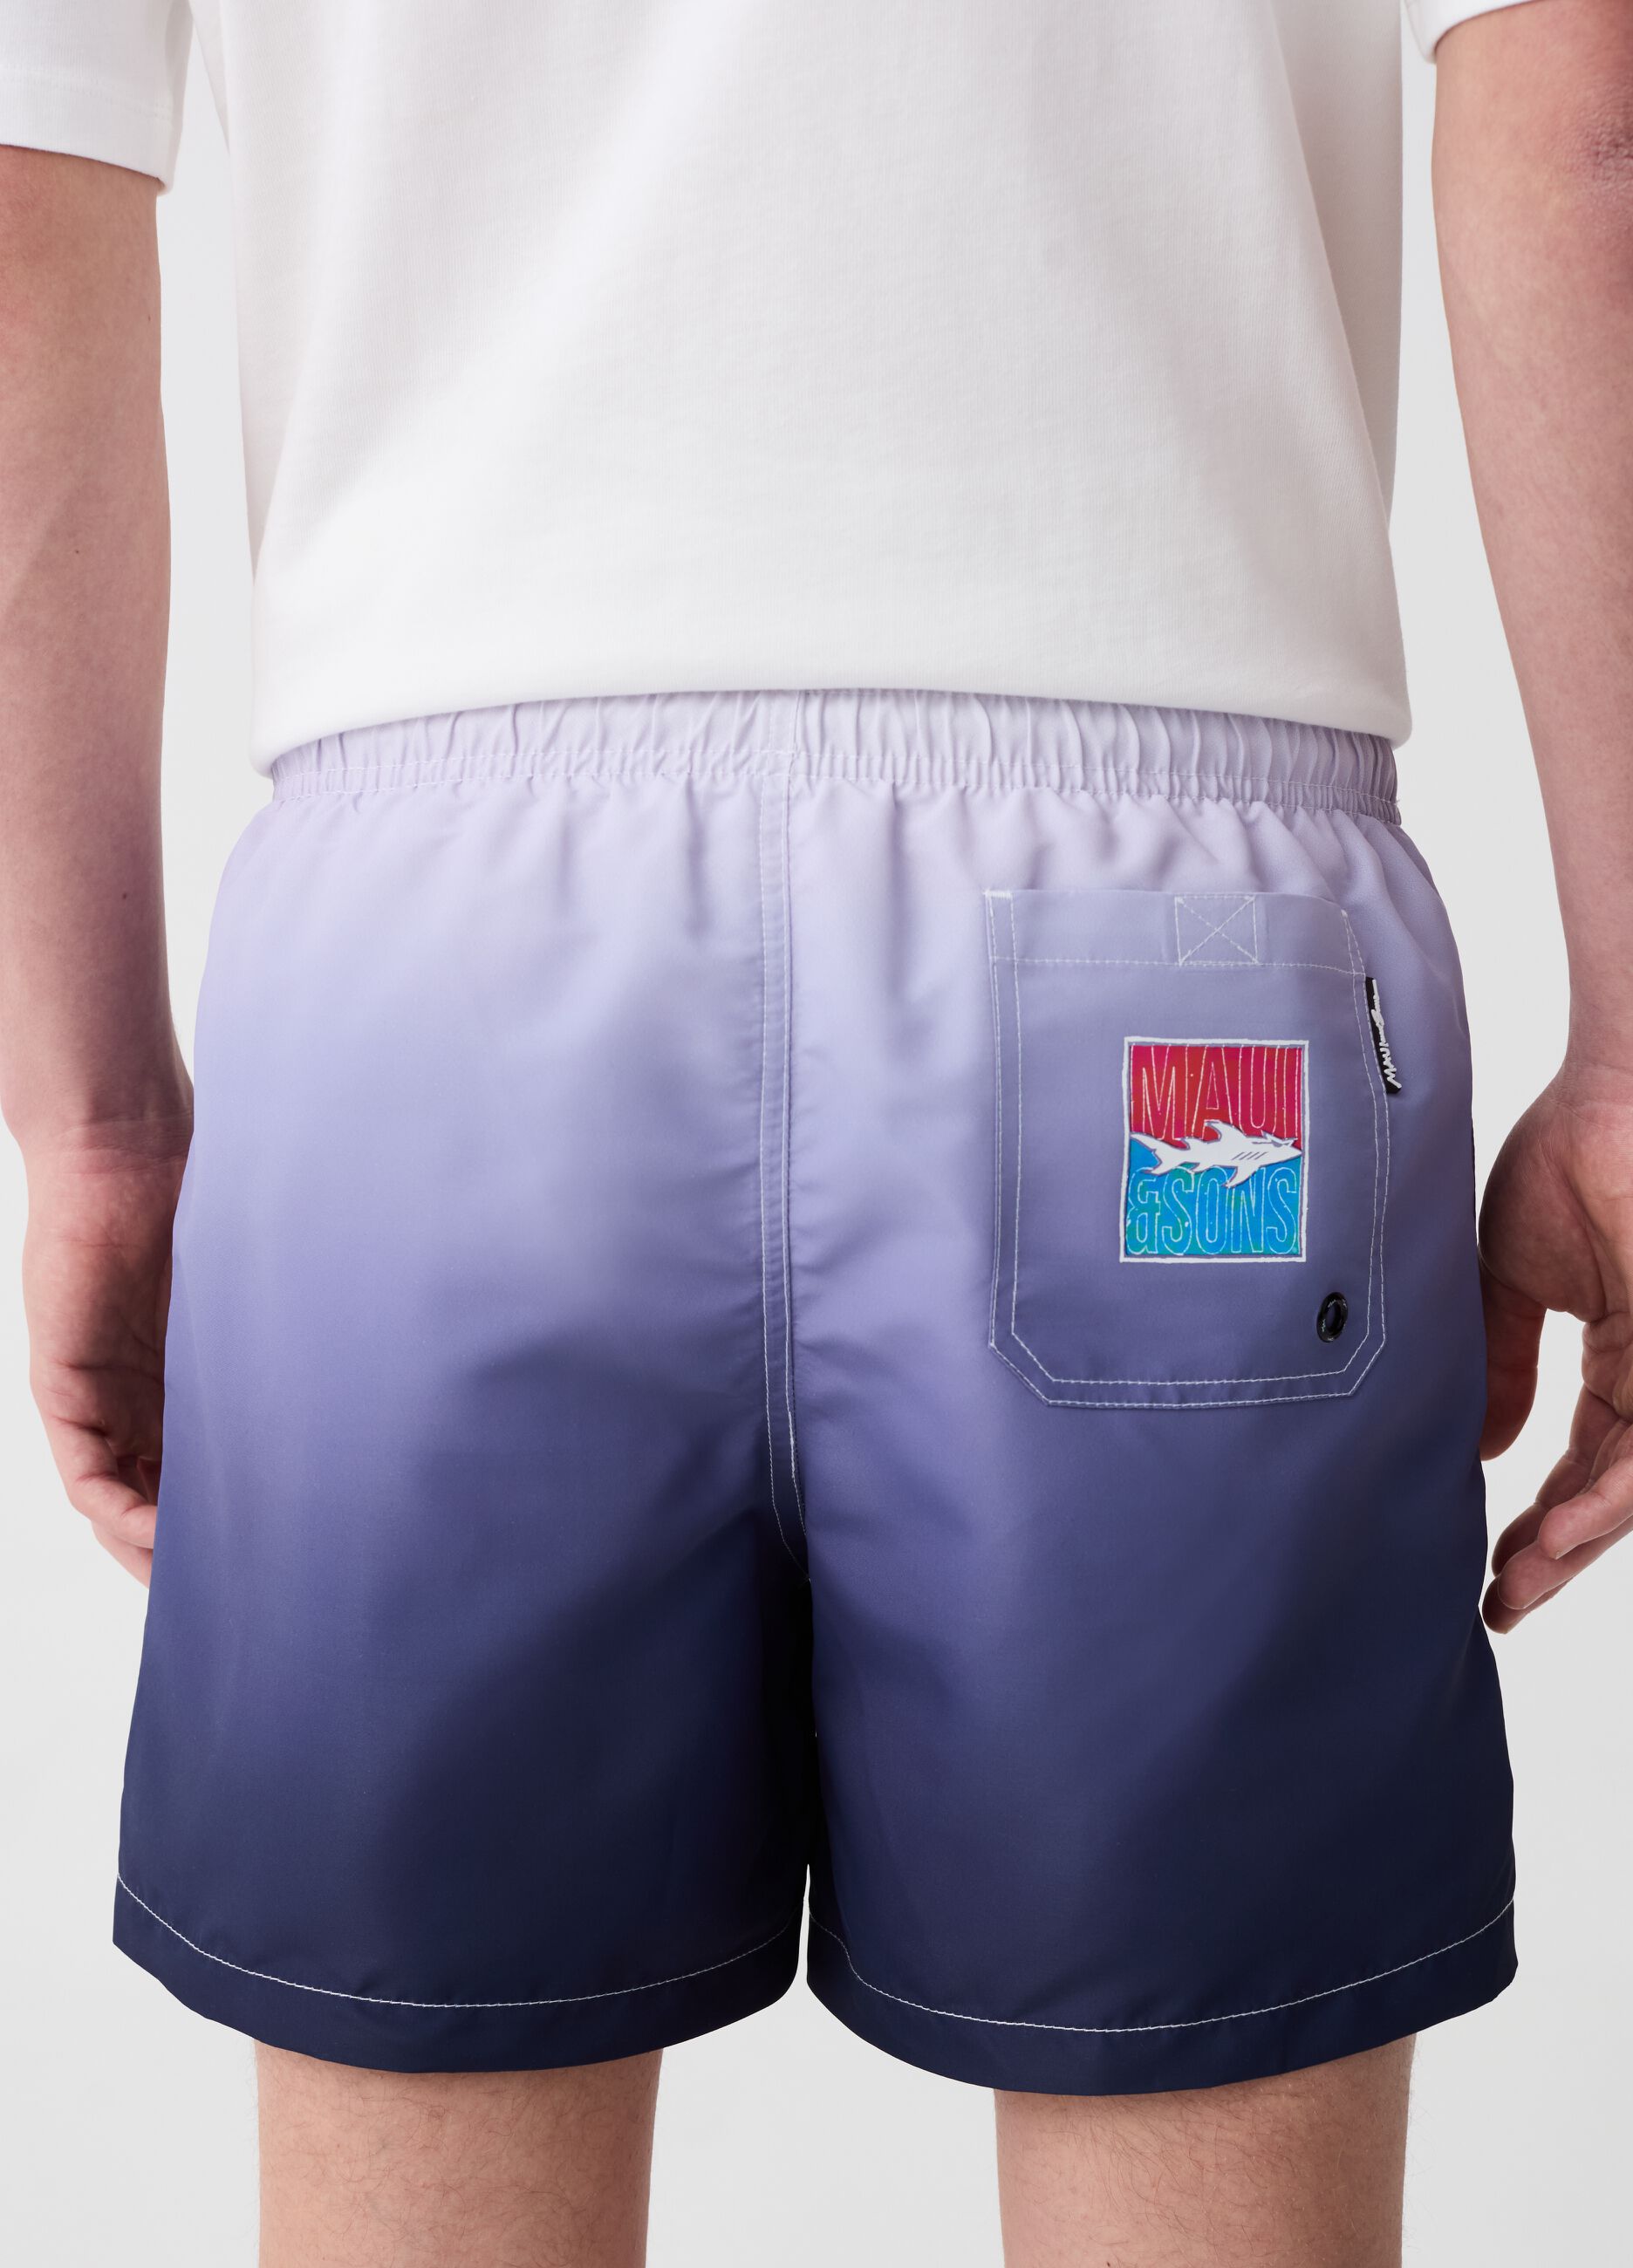 Degradé swimming trunks with logo patch